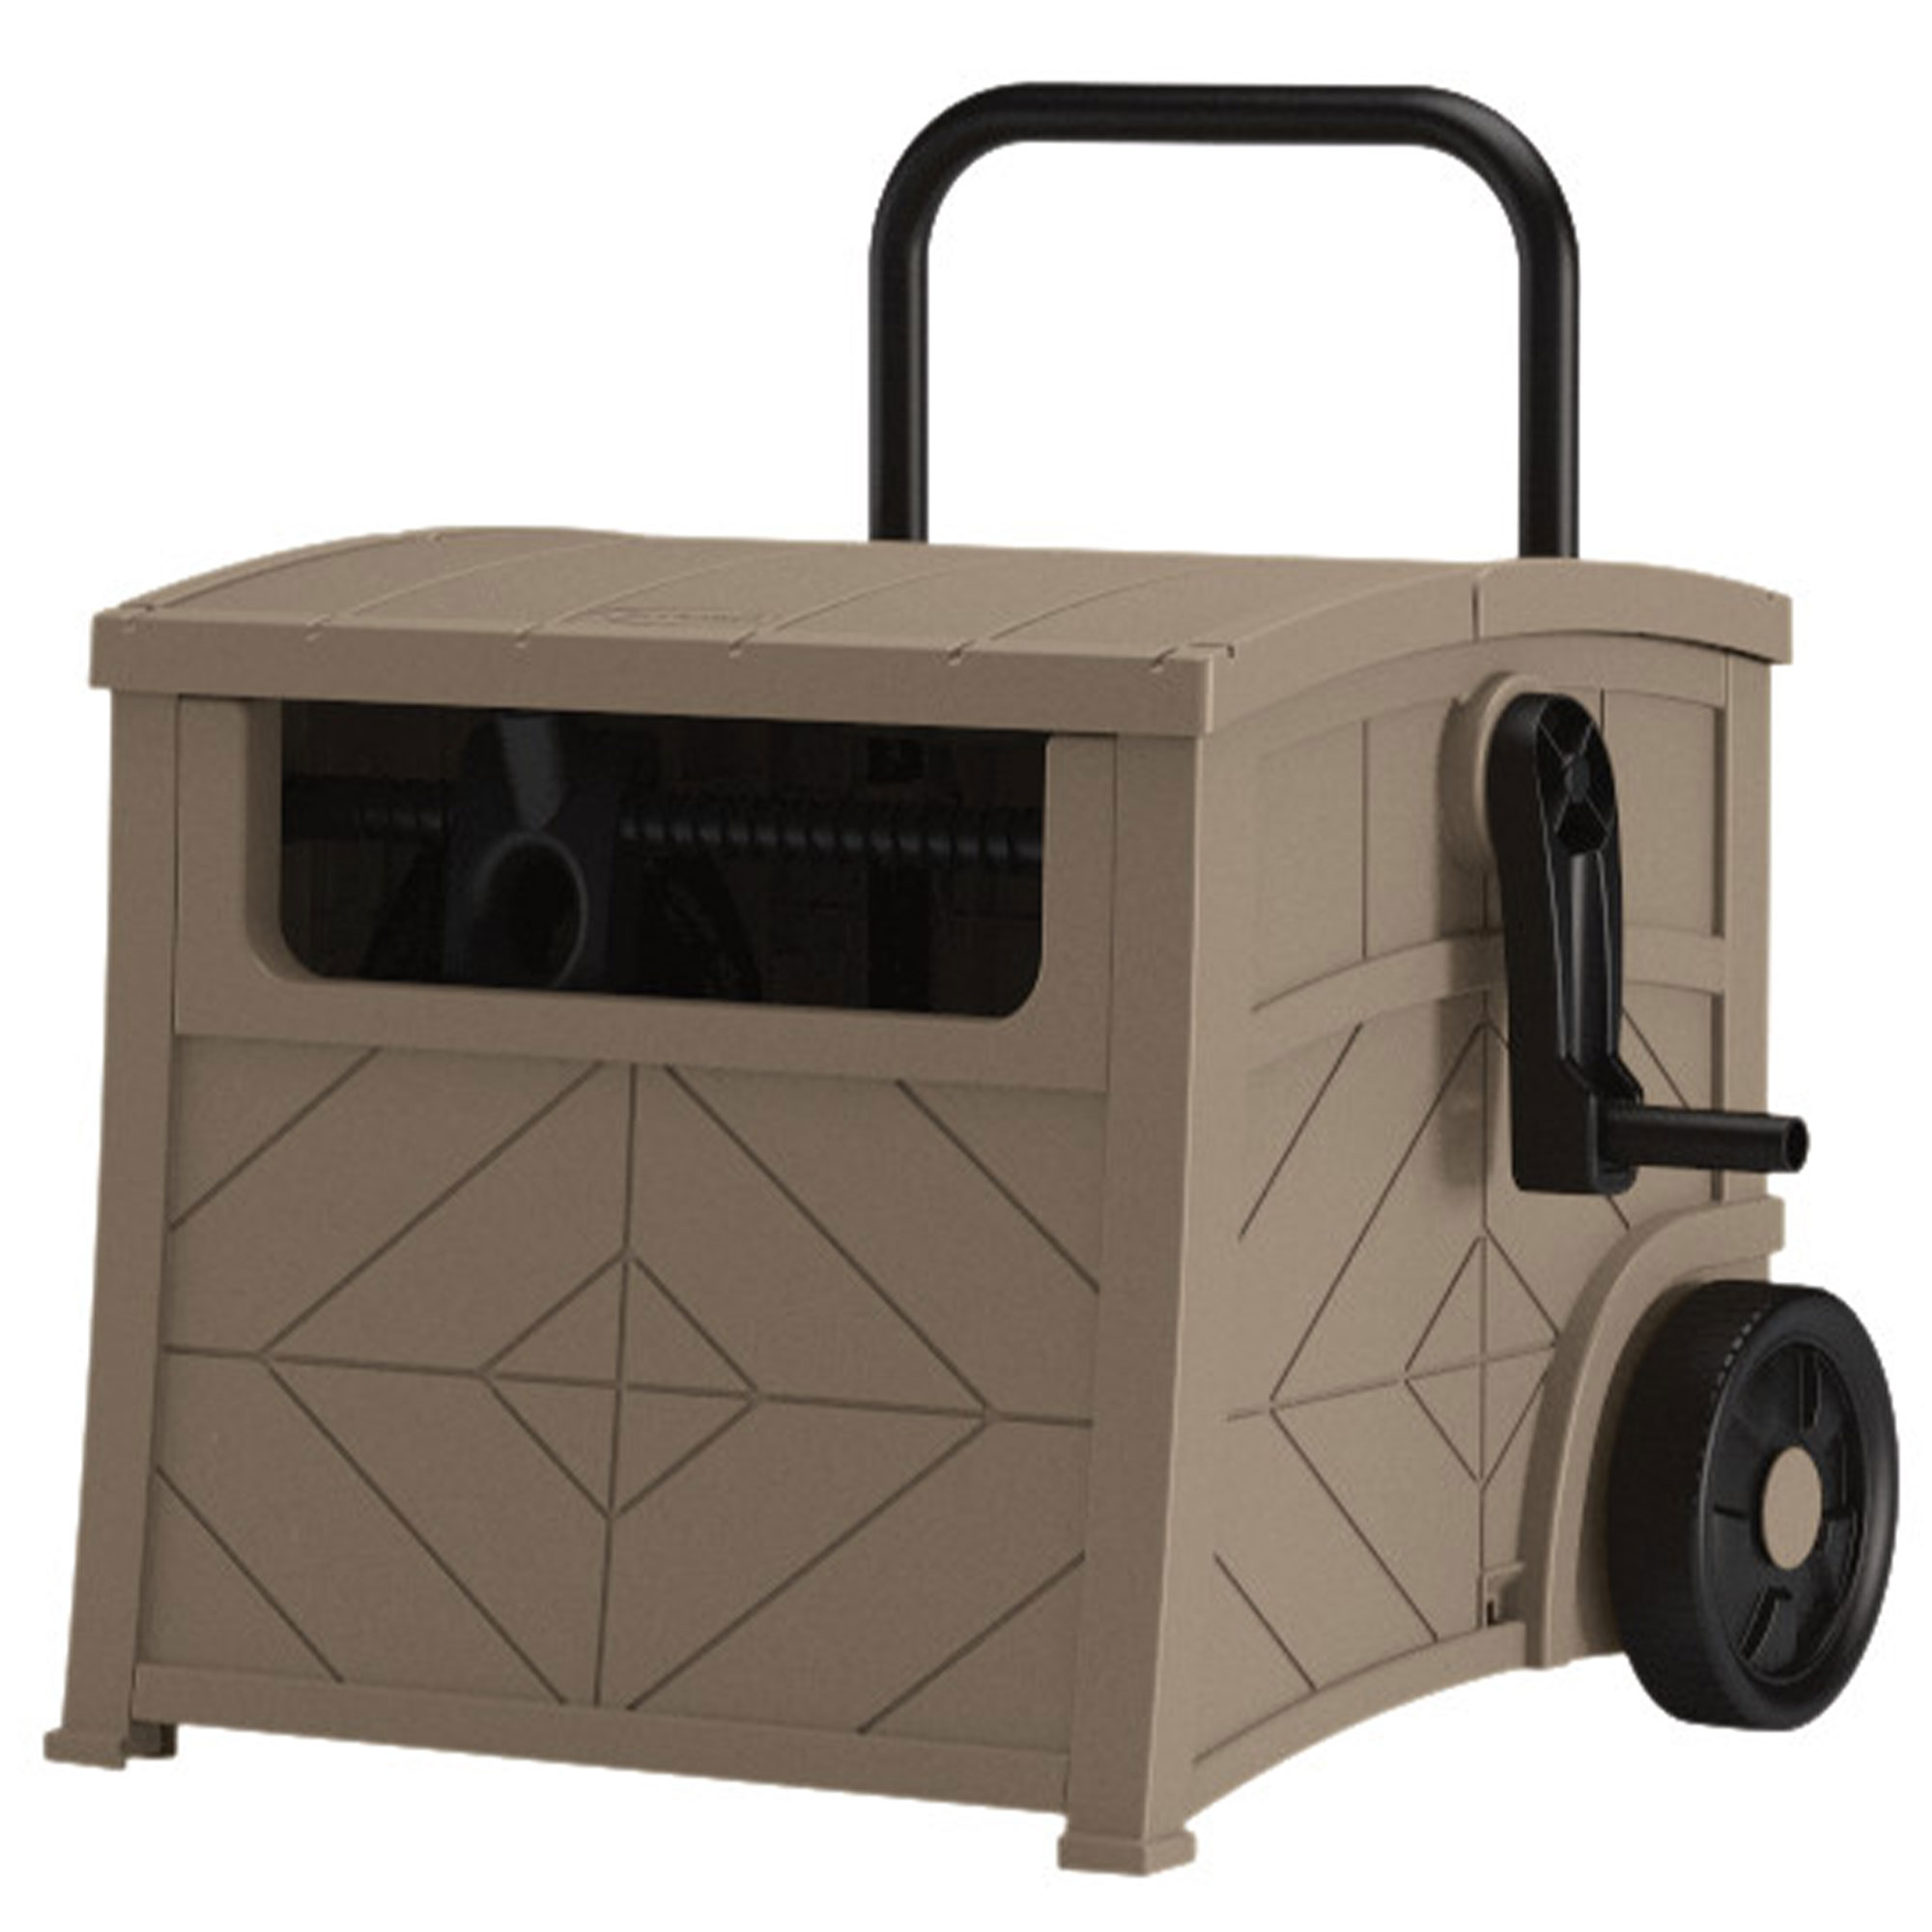 Suncast WST150 Free Standing Hideaway Hose Reel, Taupe, Hose 150' - image 2 of 7